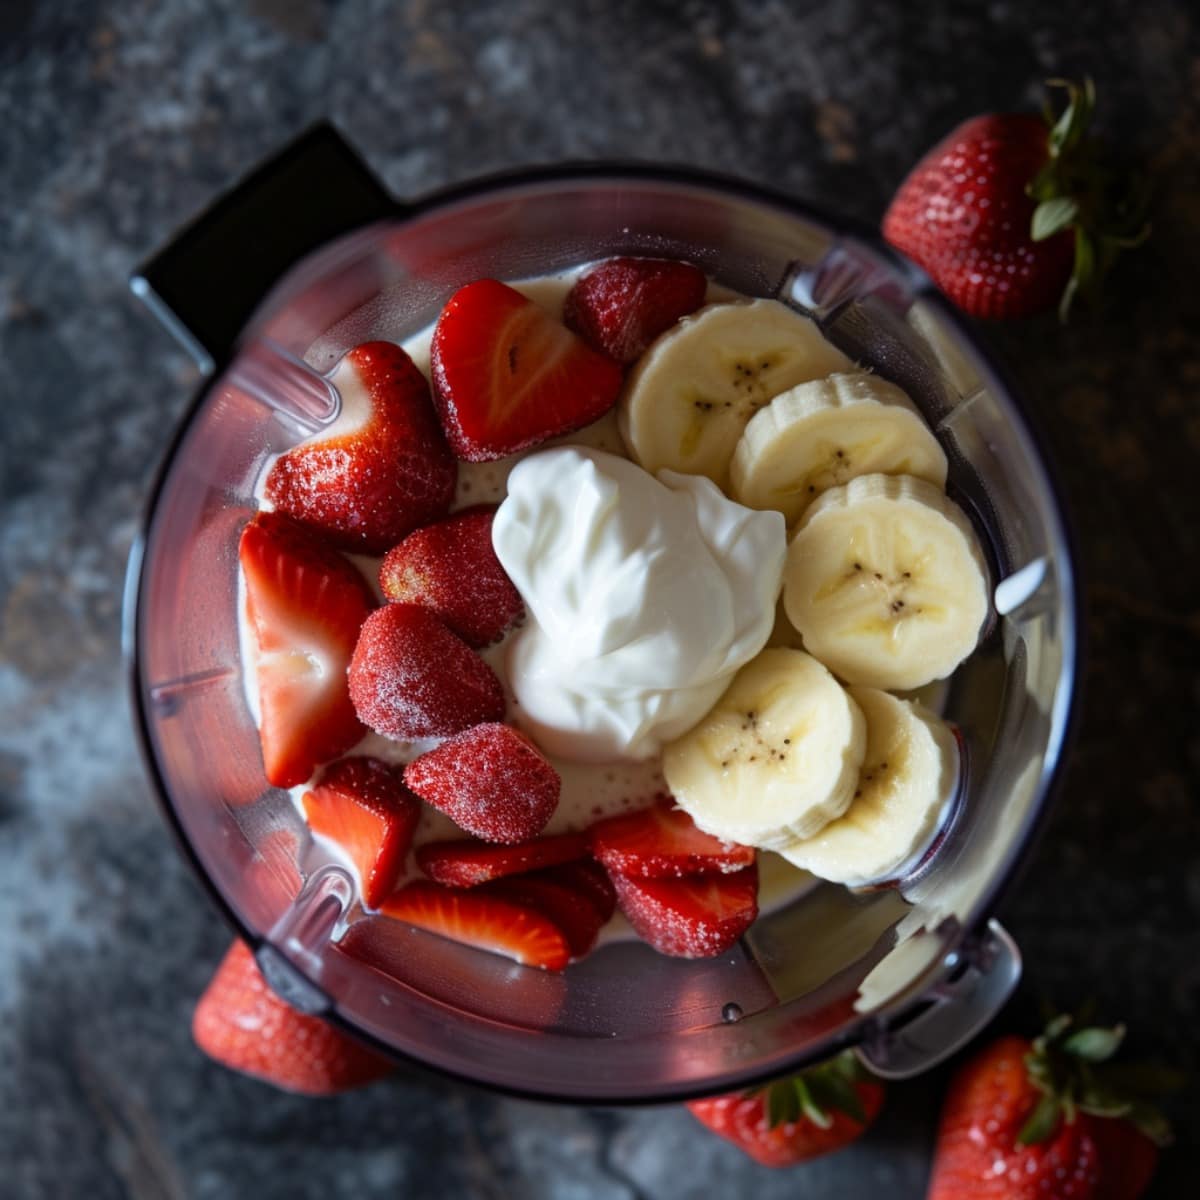 Strawberry Banana Smoothie Ingredients in a blender